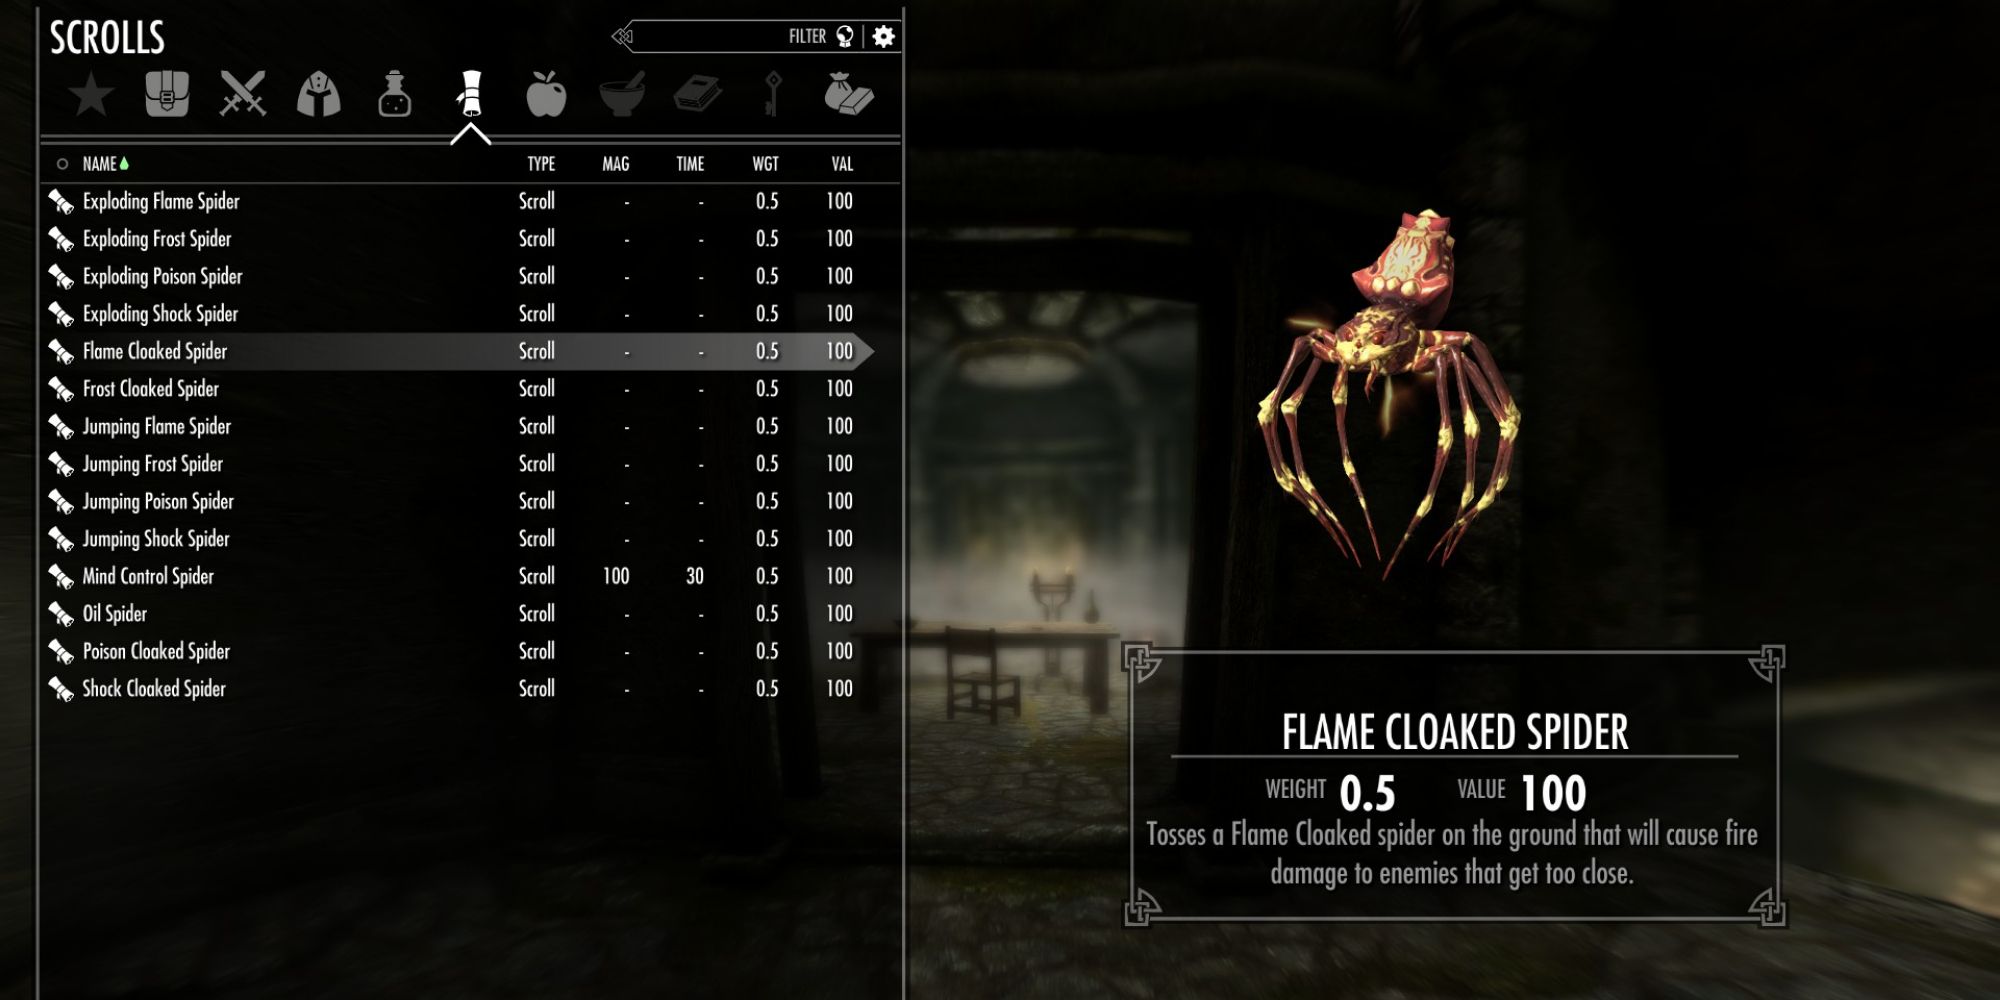 Skyrim flame cloaked spider scroll inventory